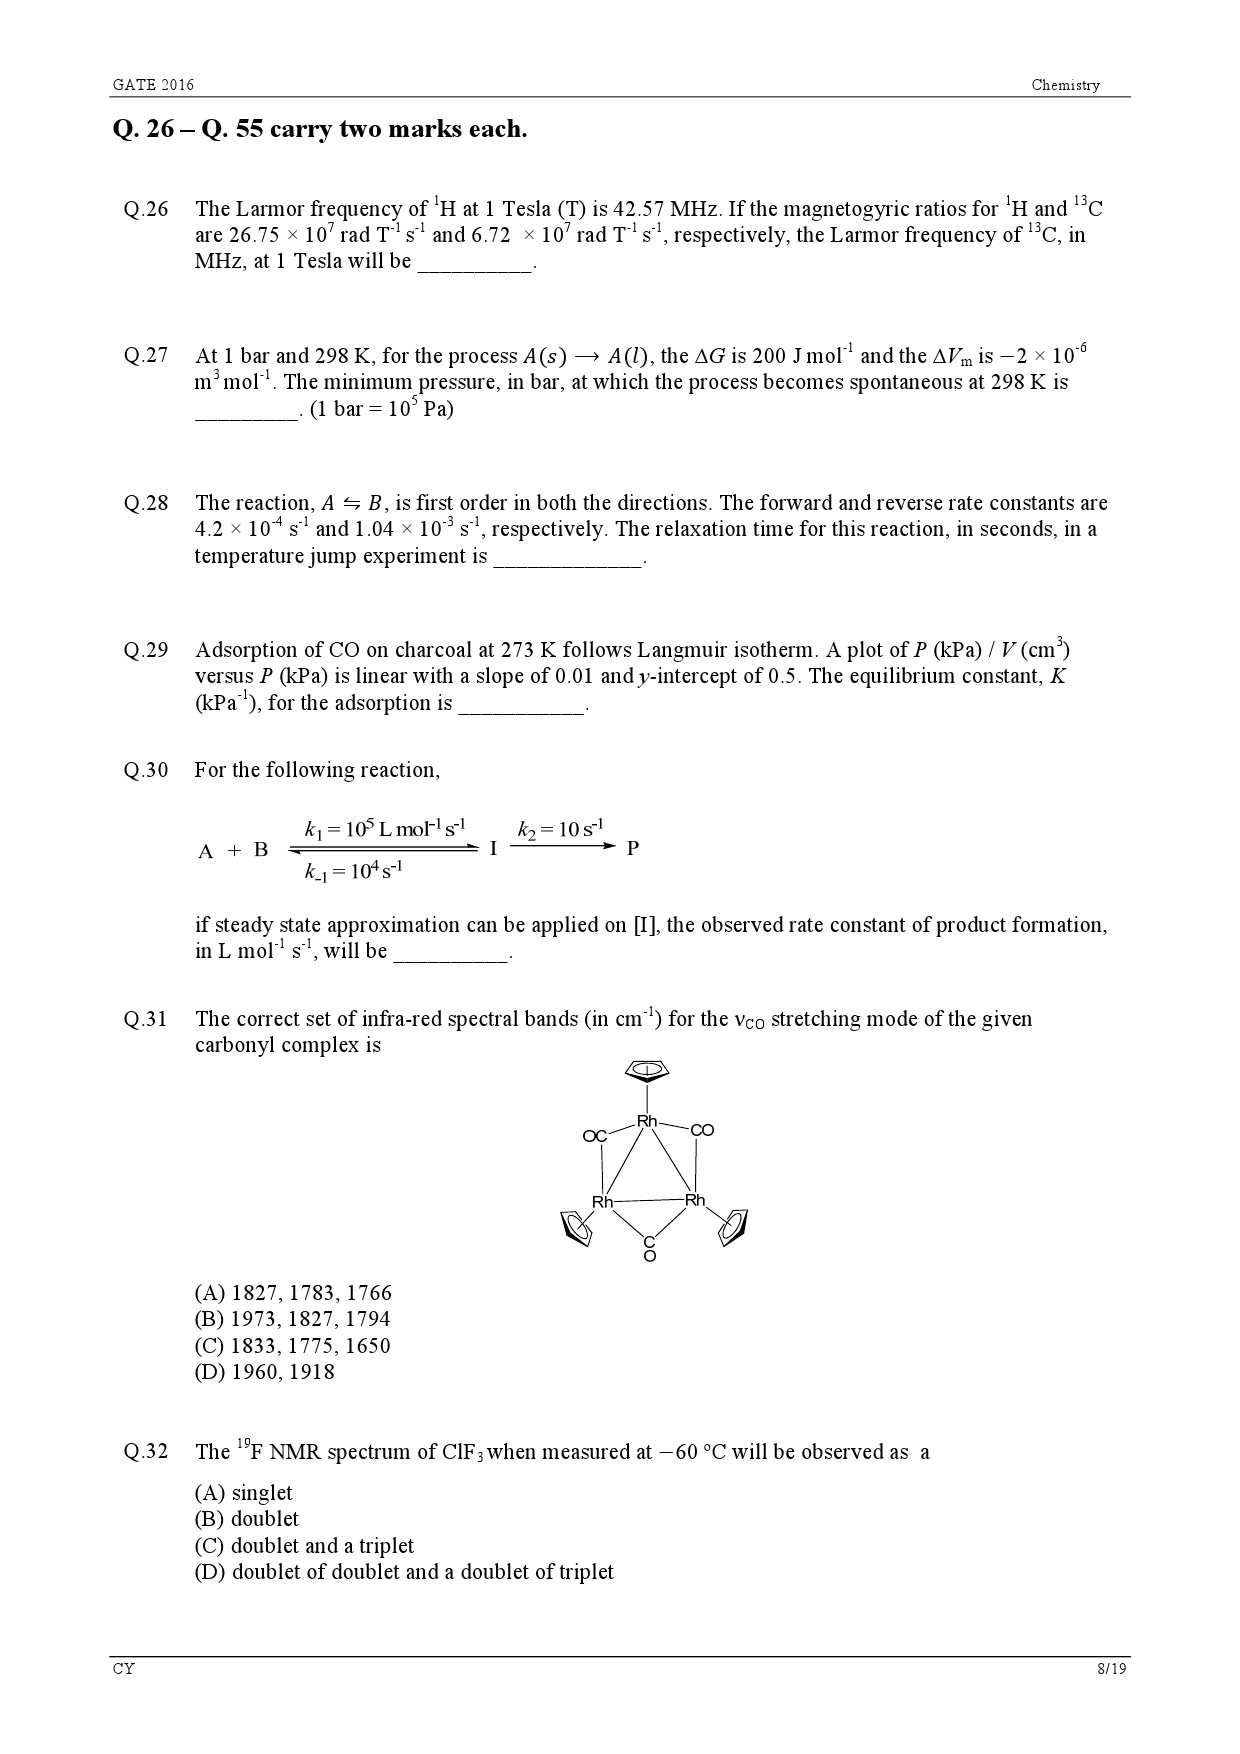 GATE Exam Question Paper 2016 Chemistry 11